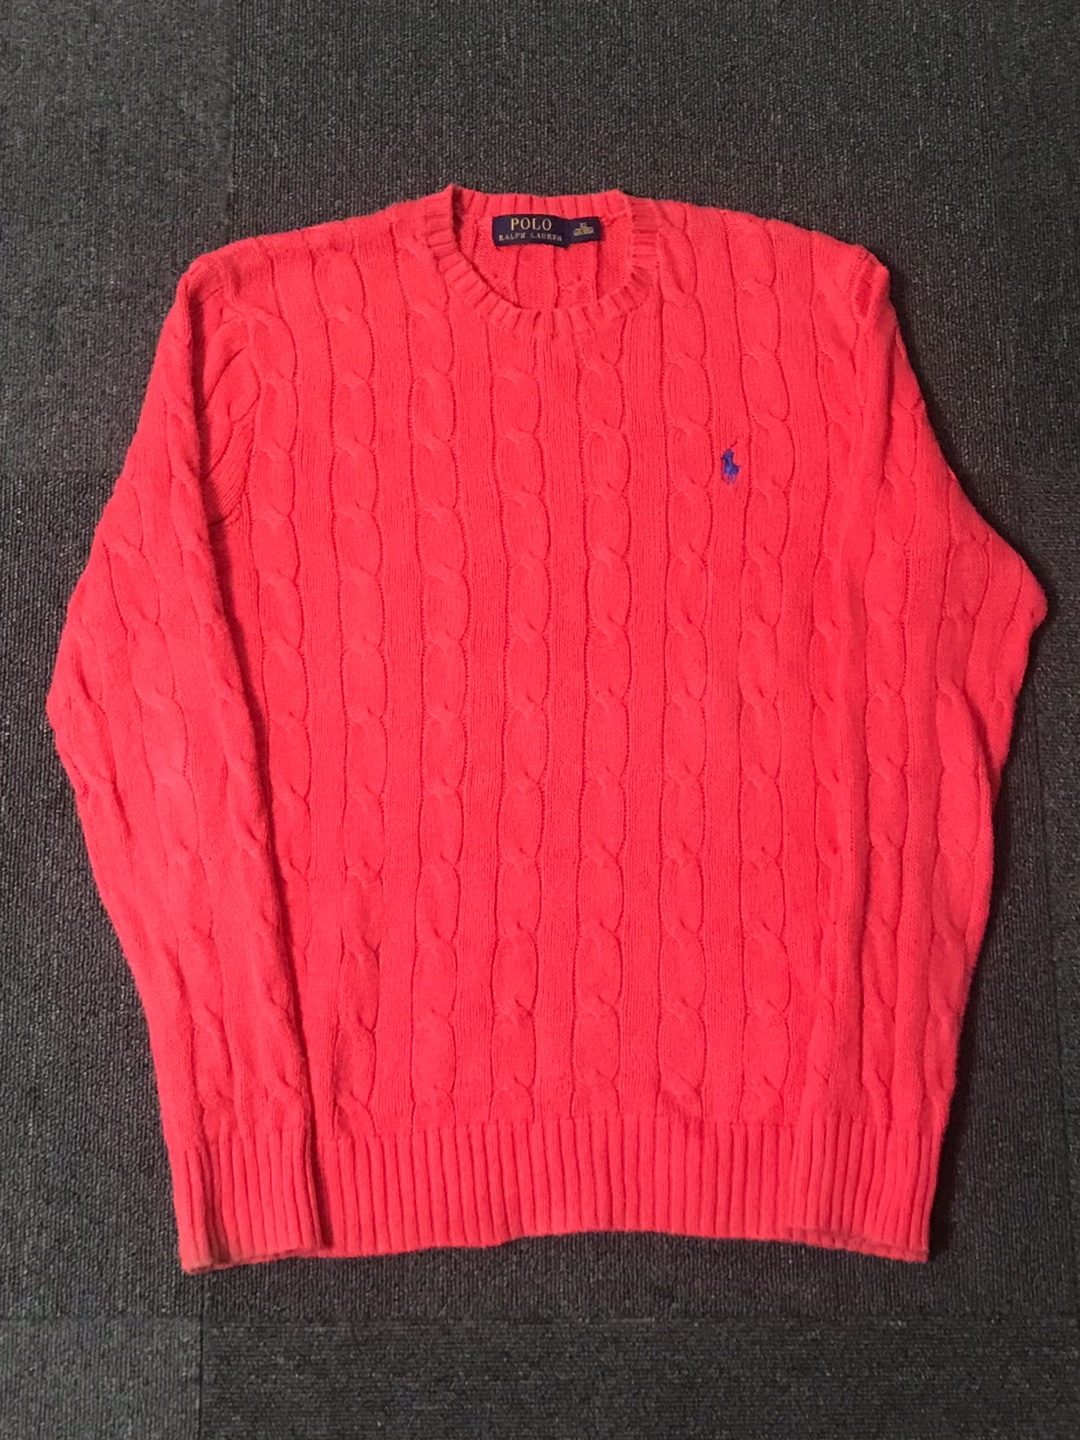 Polo RL cotton cable sweater (XS size, ~103 추천)